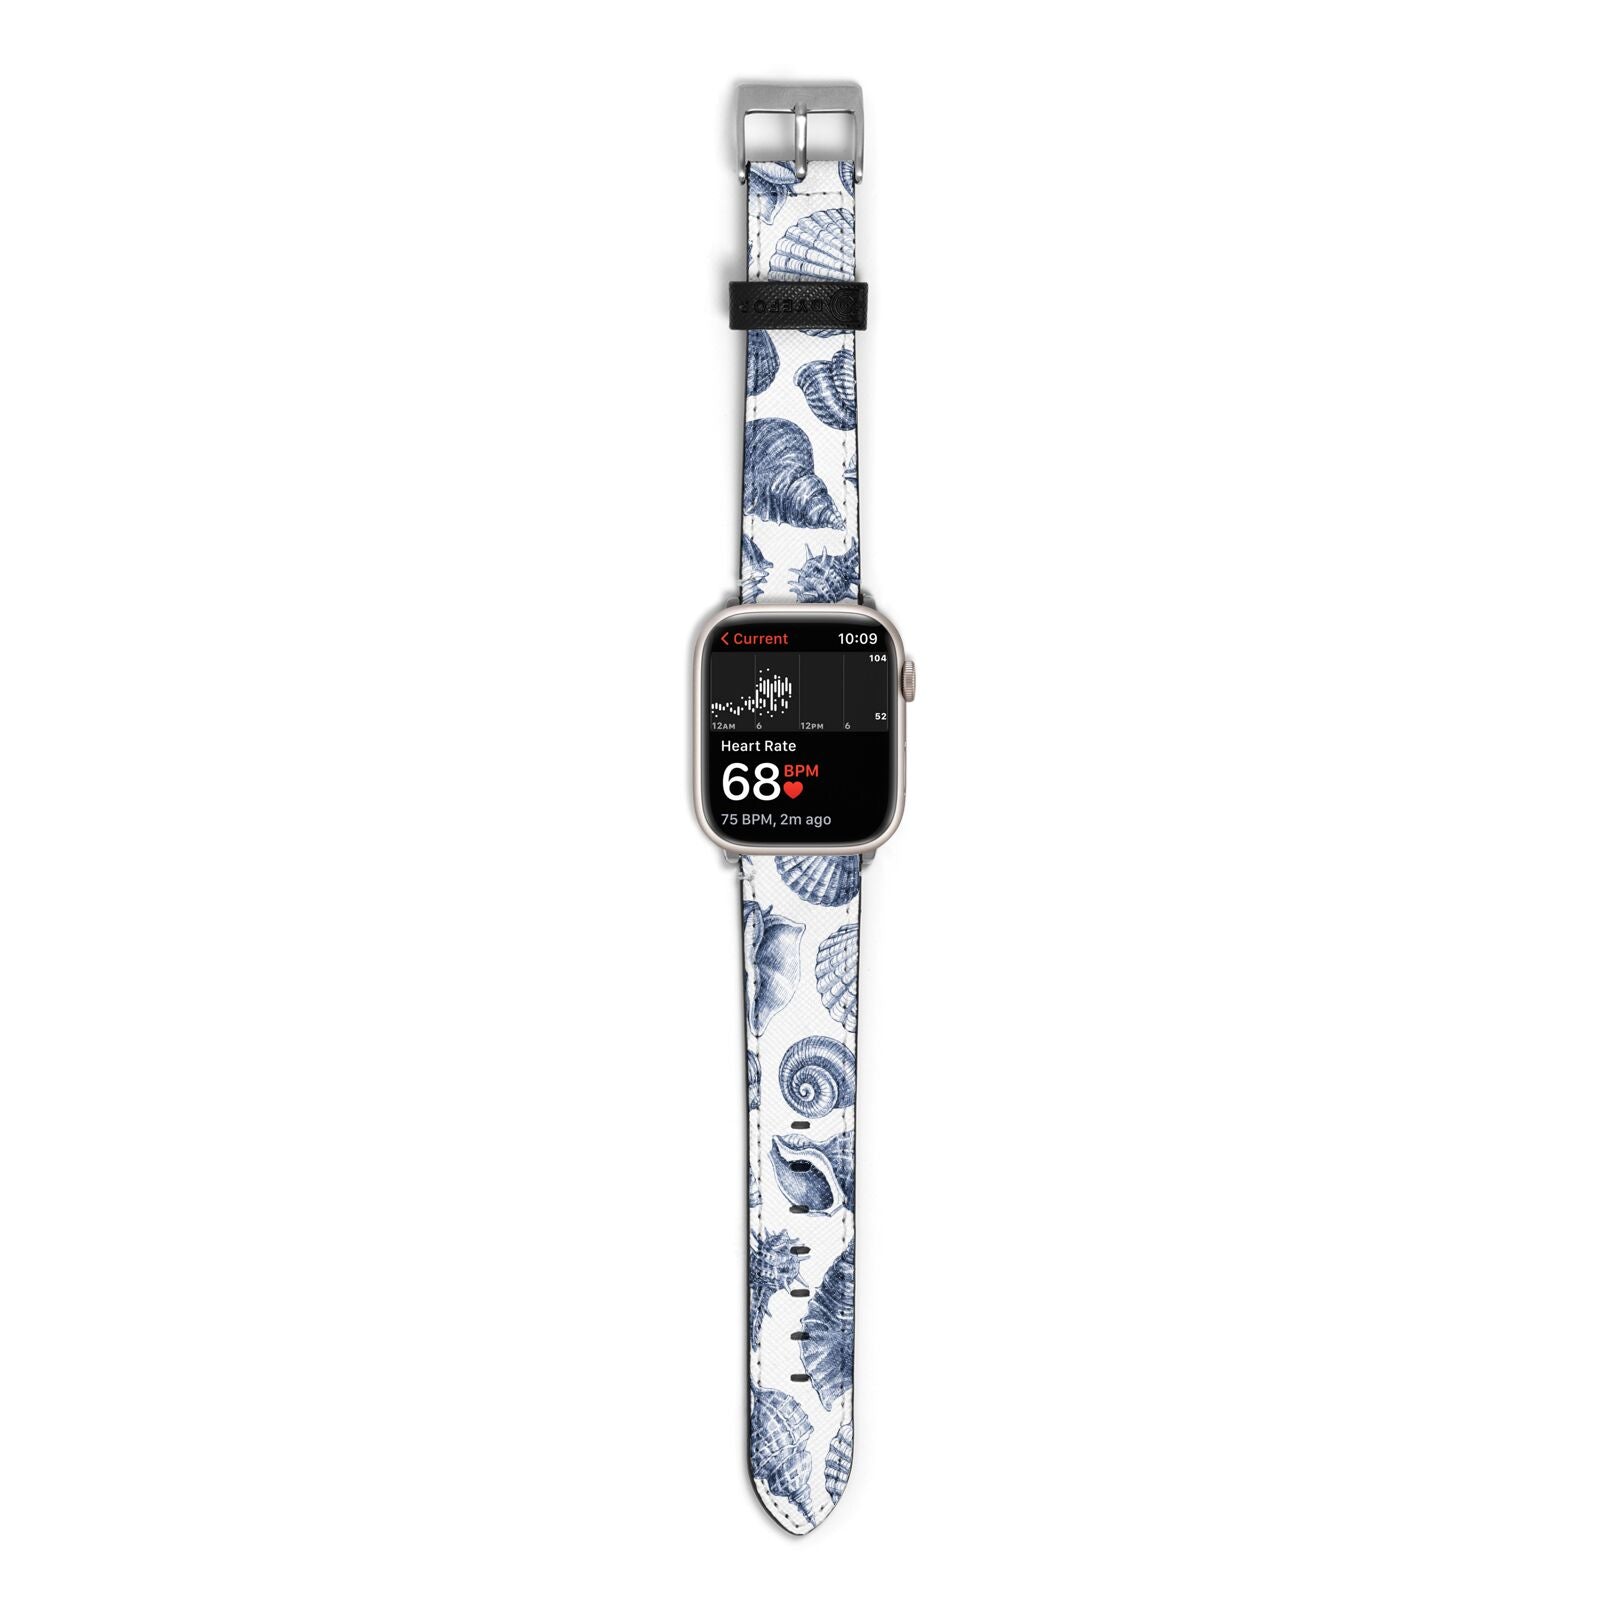 Shell Apple Watch Strap Size 38mm with Silver Hardware